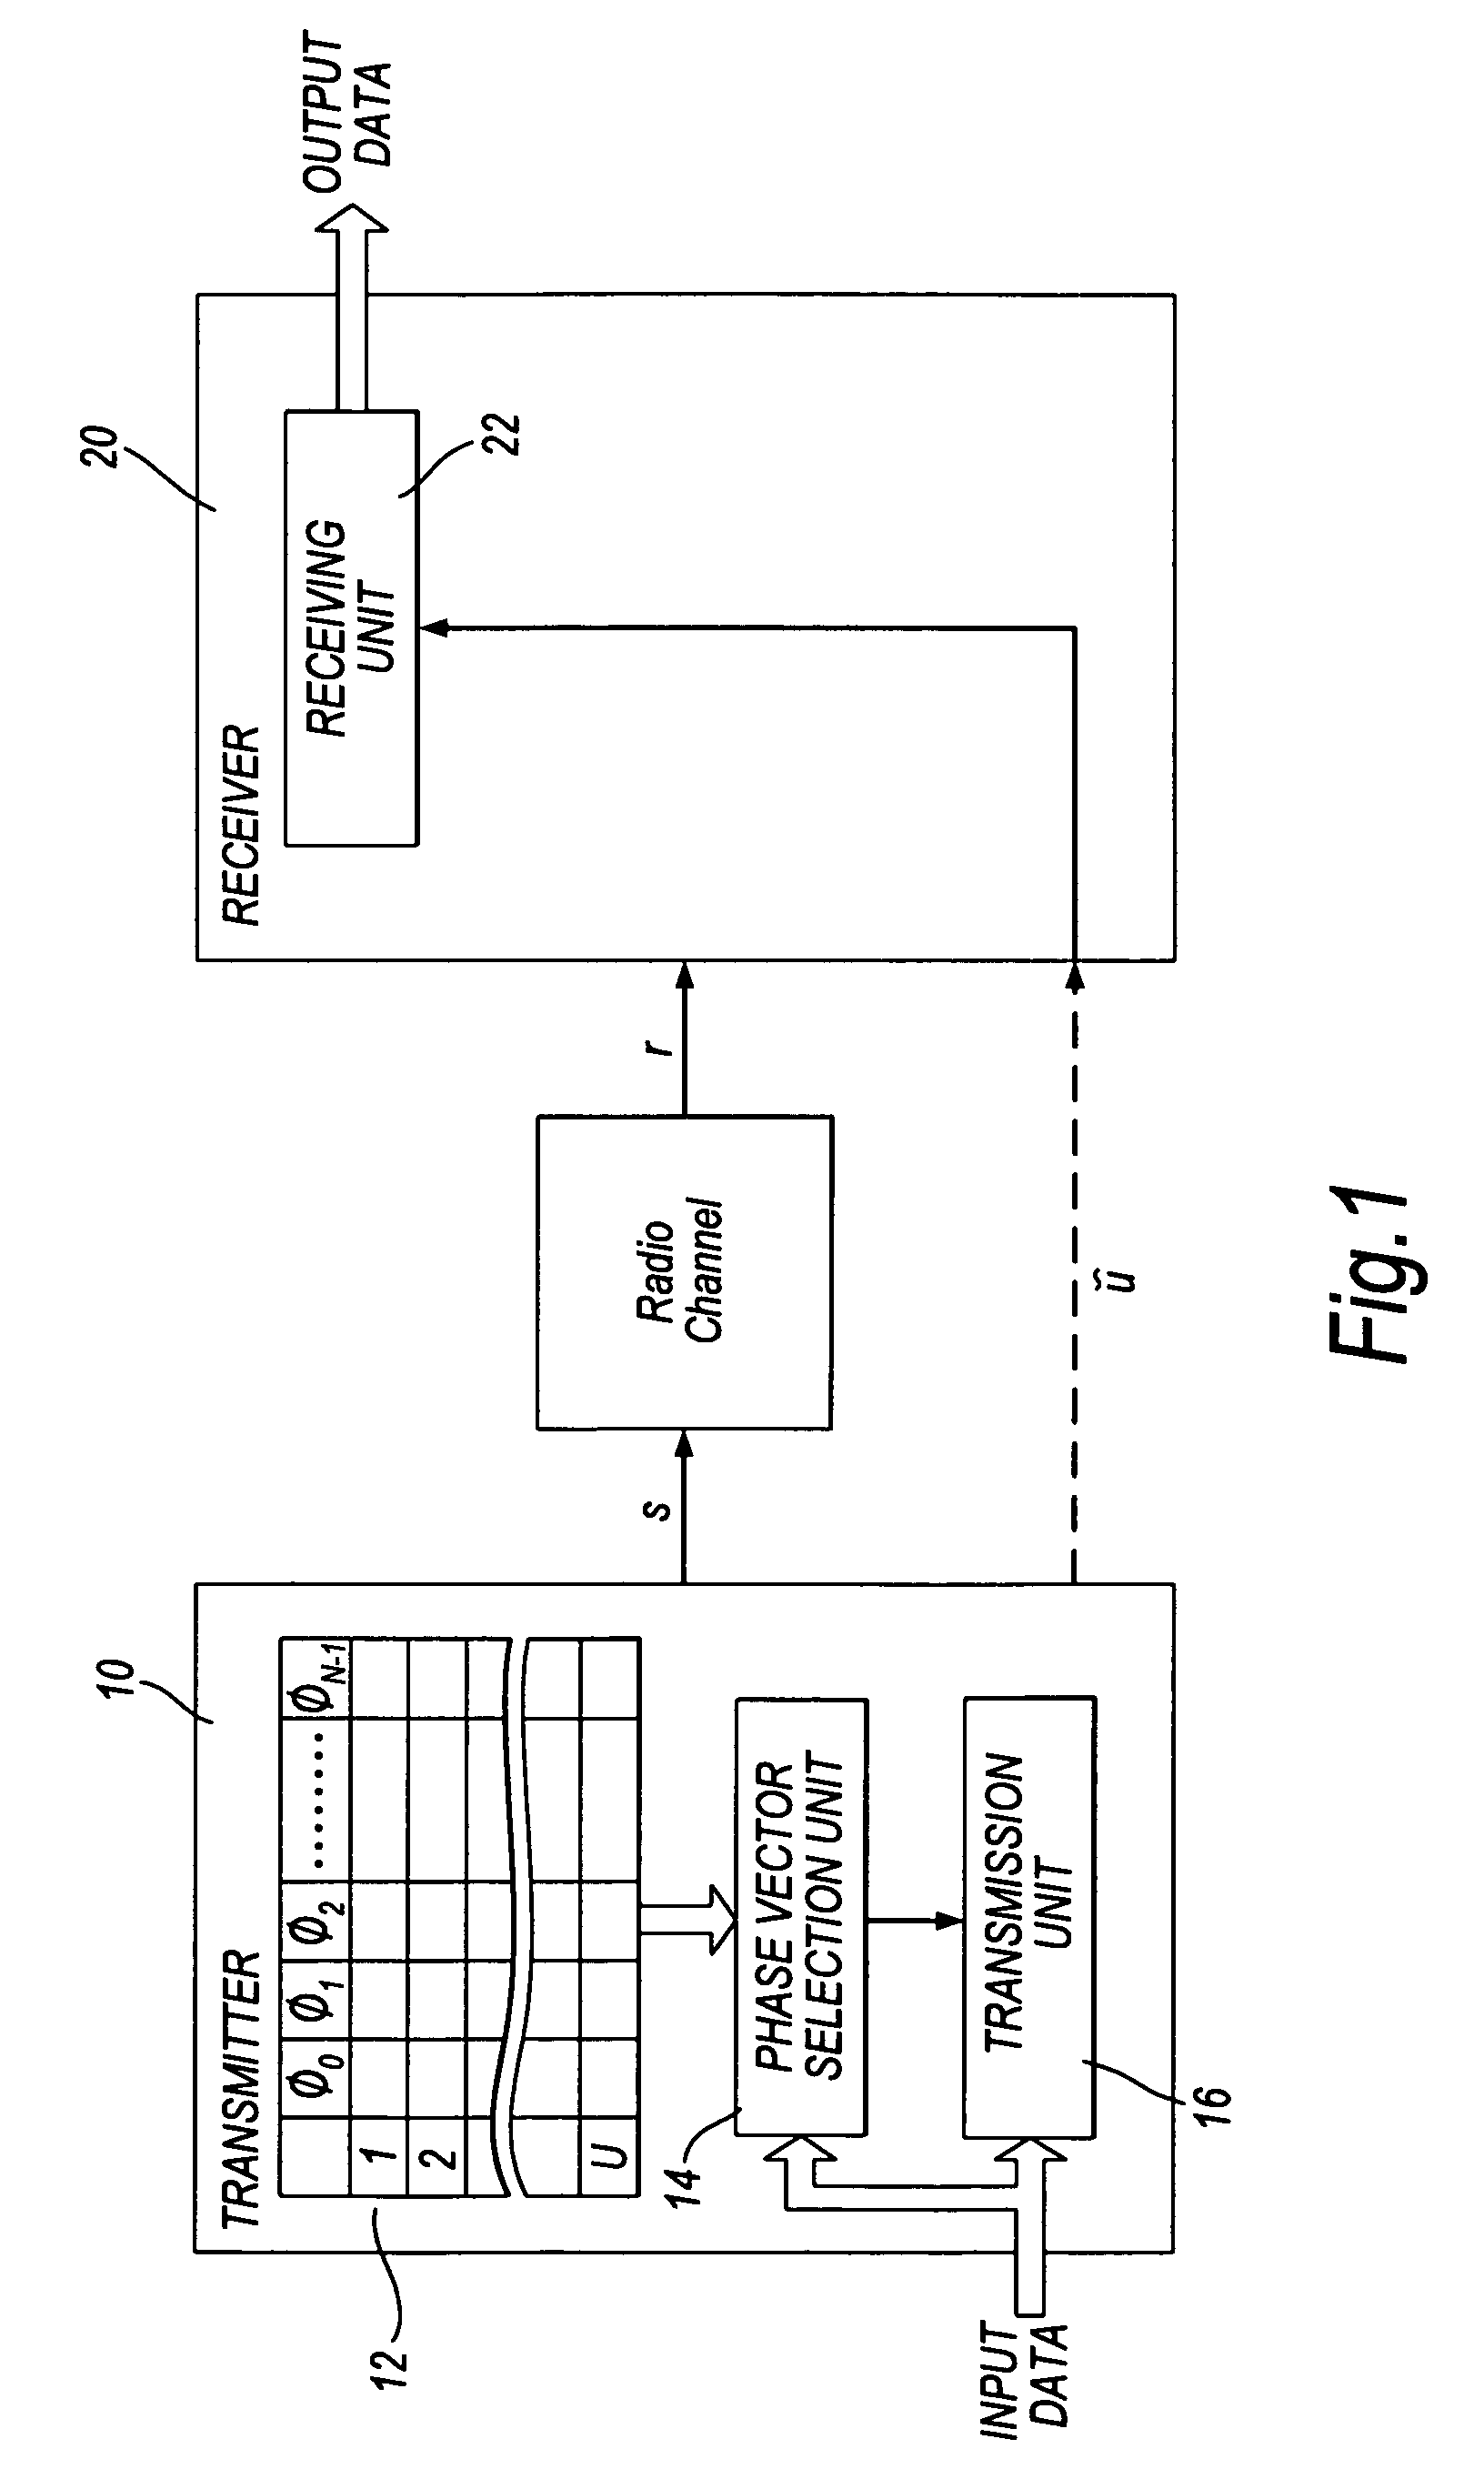 Communications systems and methods using phase vectors